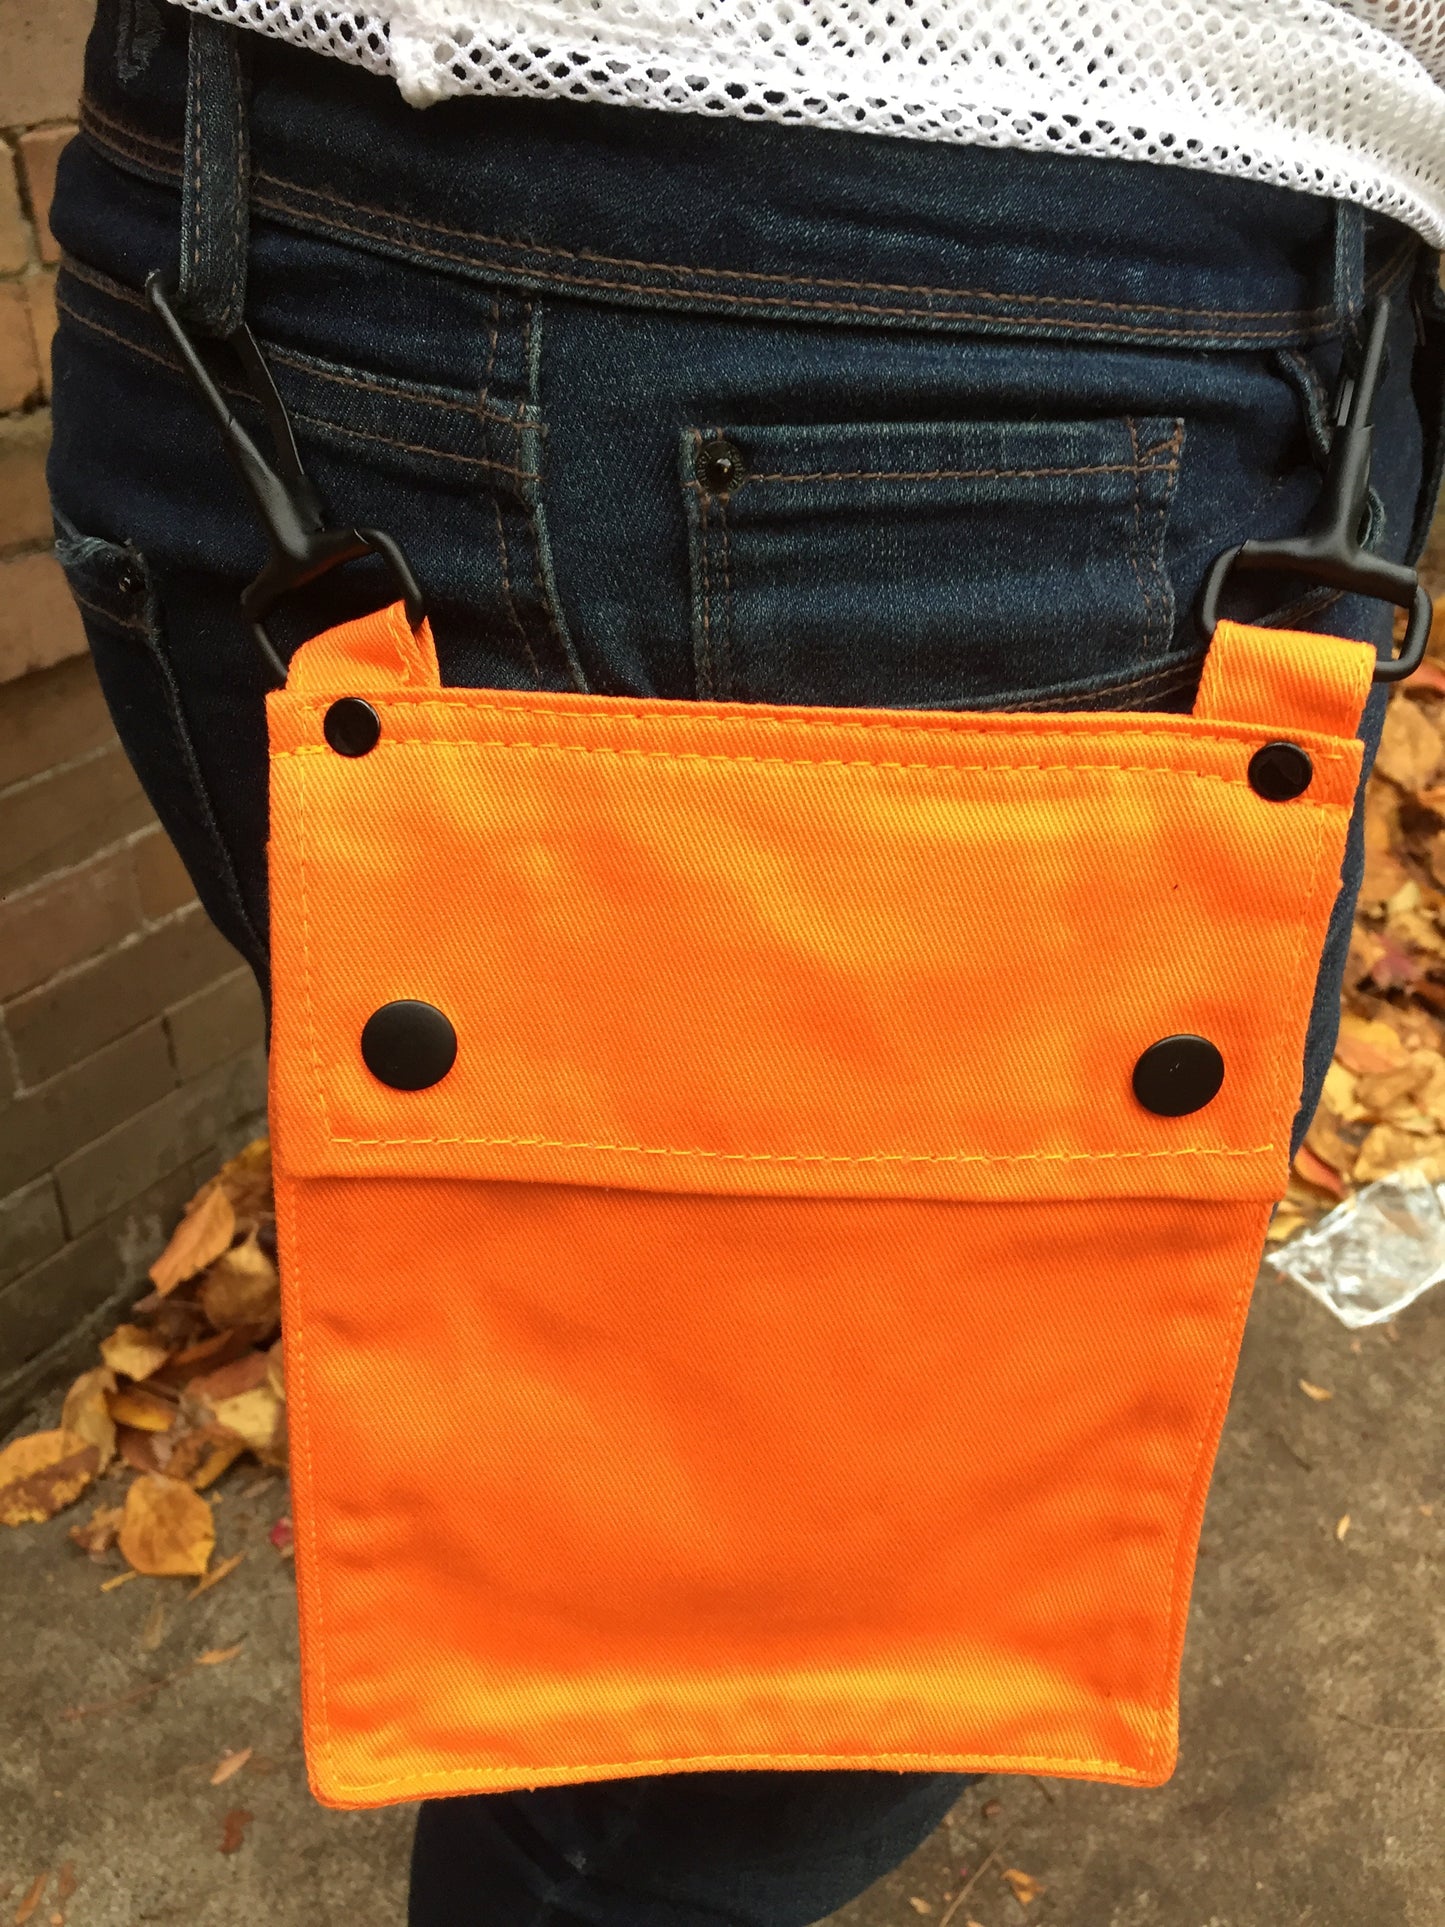 A model wearing the orange Detachable Pocket for Heritage Kilt hooked to their jeans belt loops.